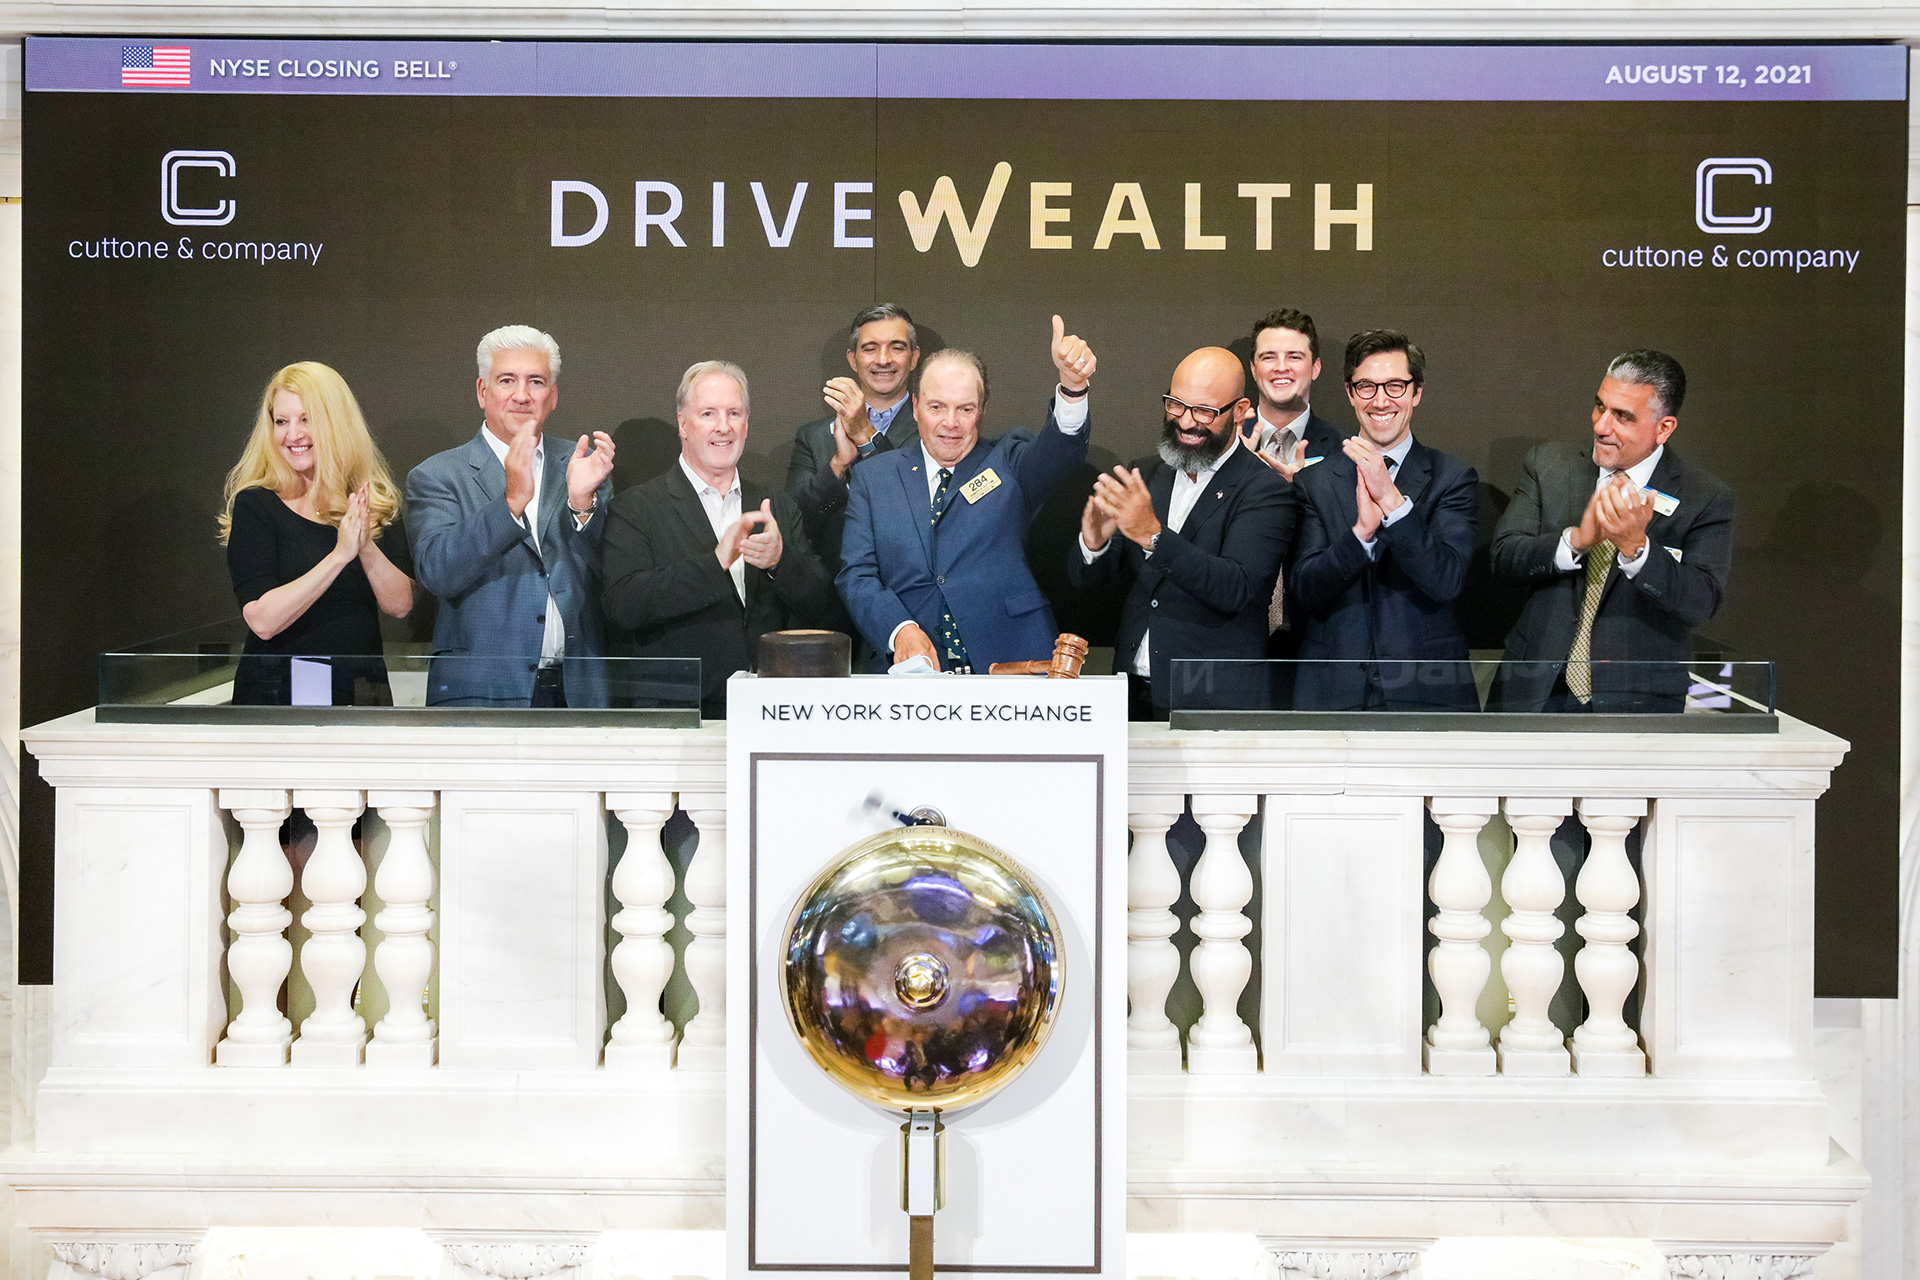 DriveWealth Rings the Closing Bell on the NYSE to Celebrate Our Acquisition of Cuttone and Company